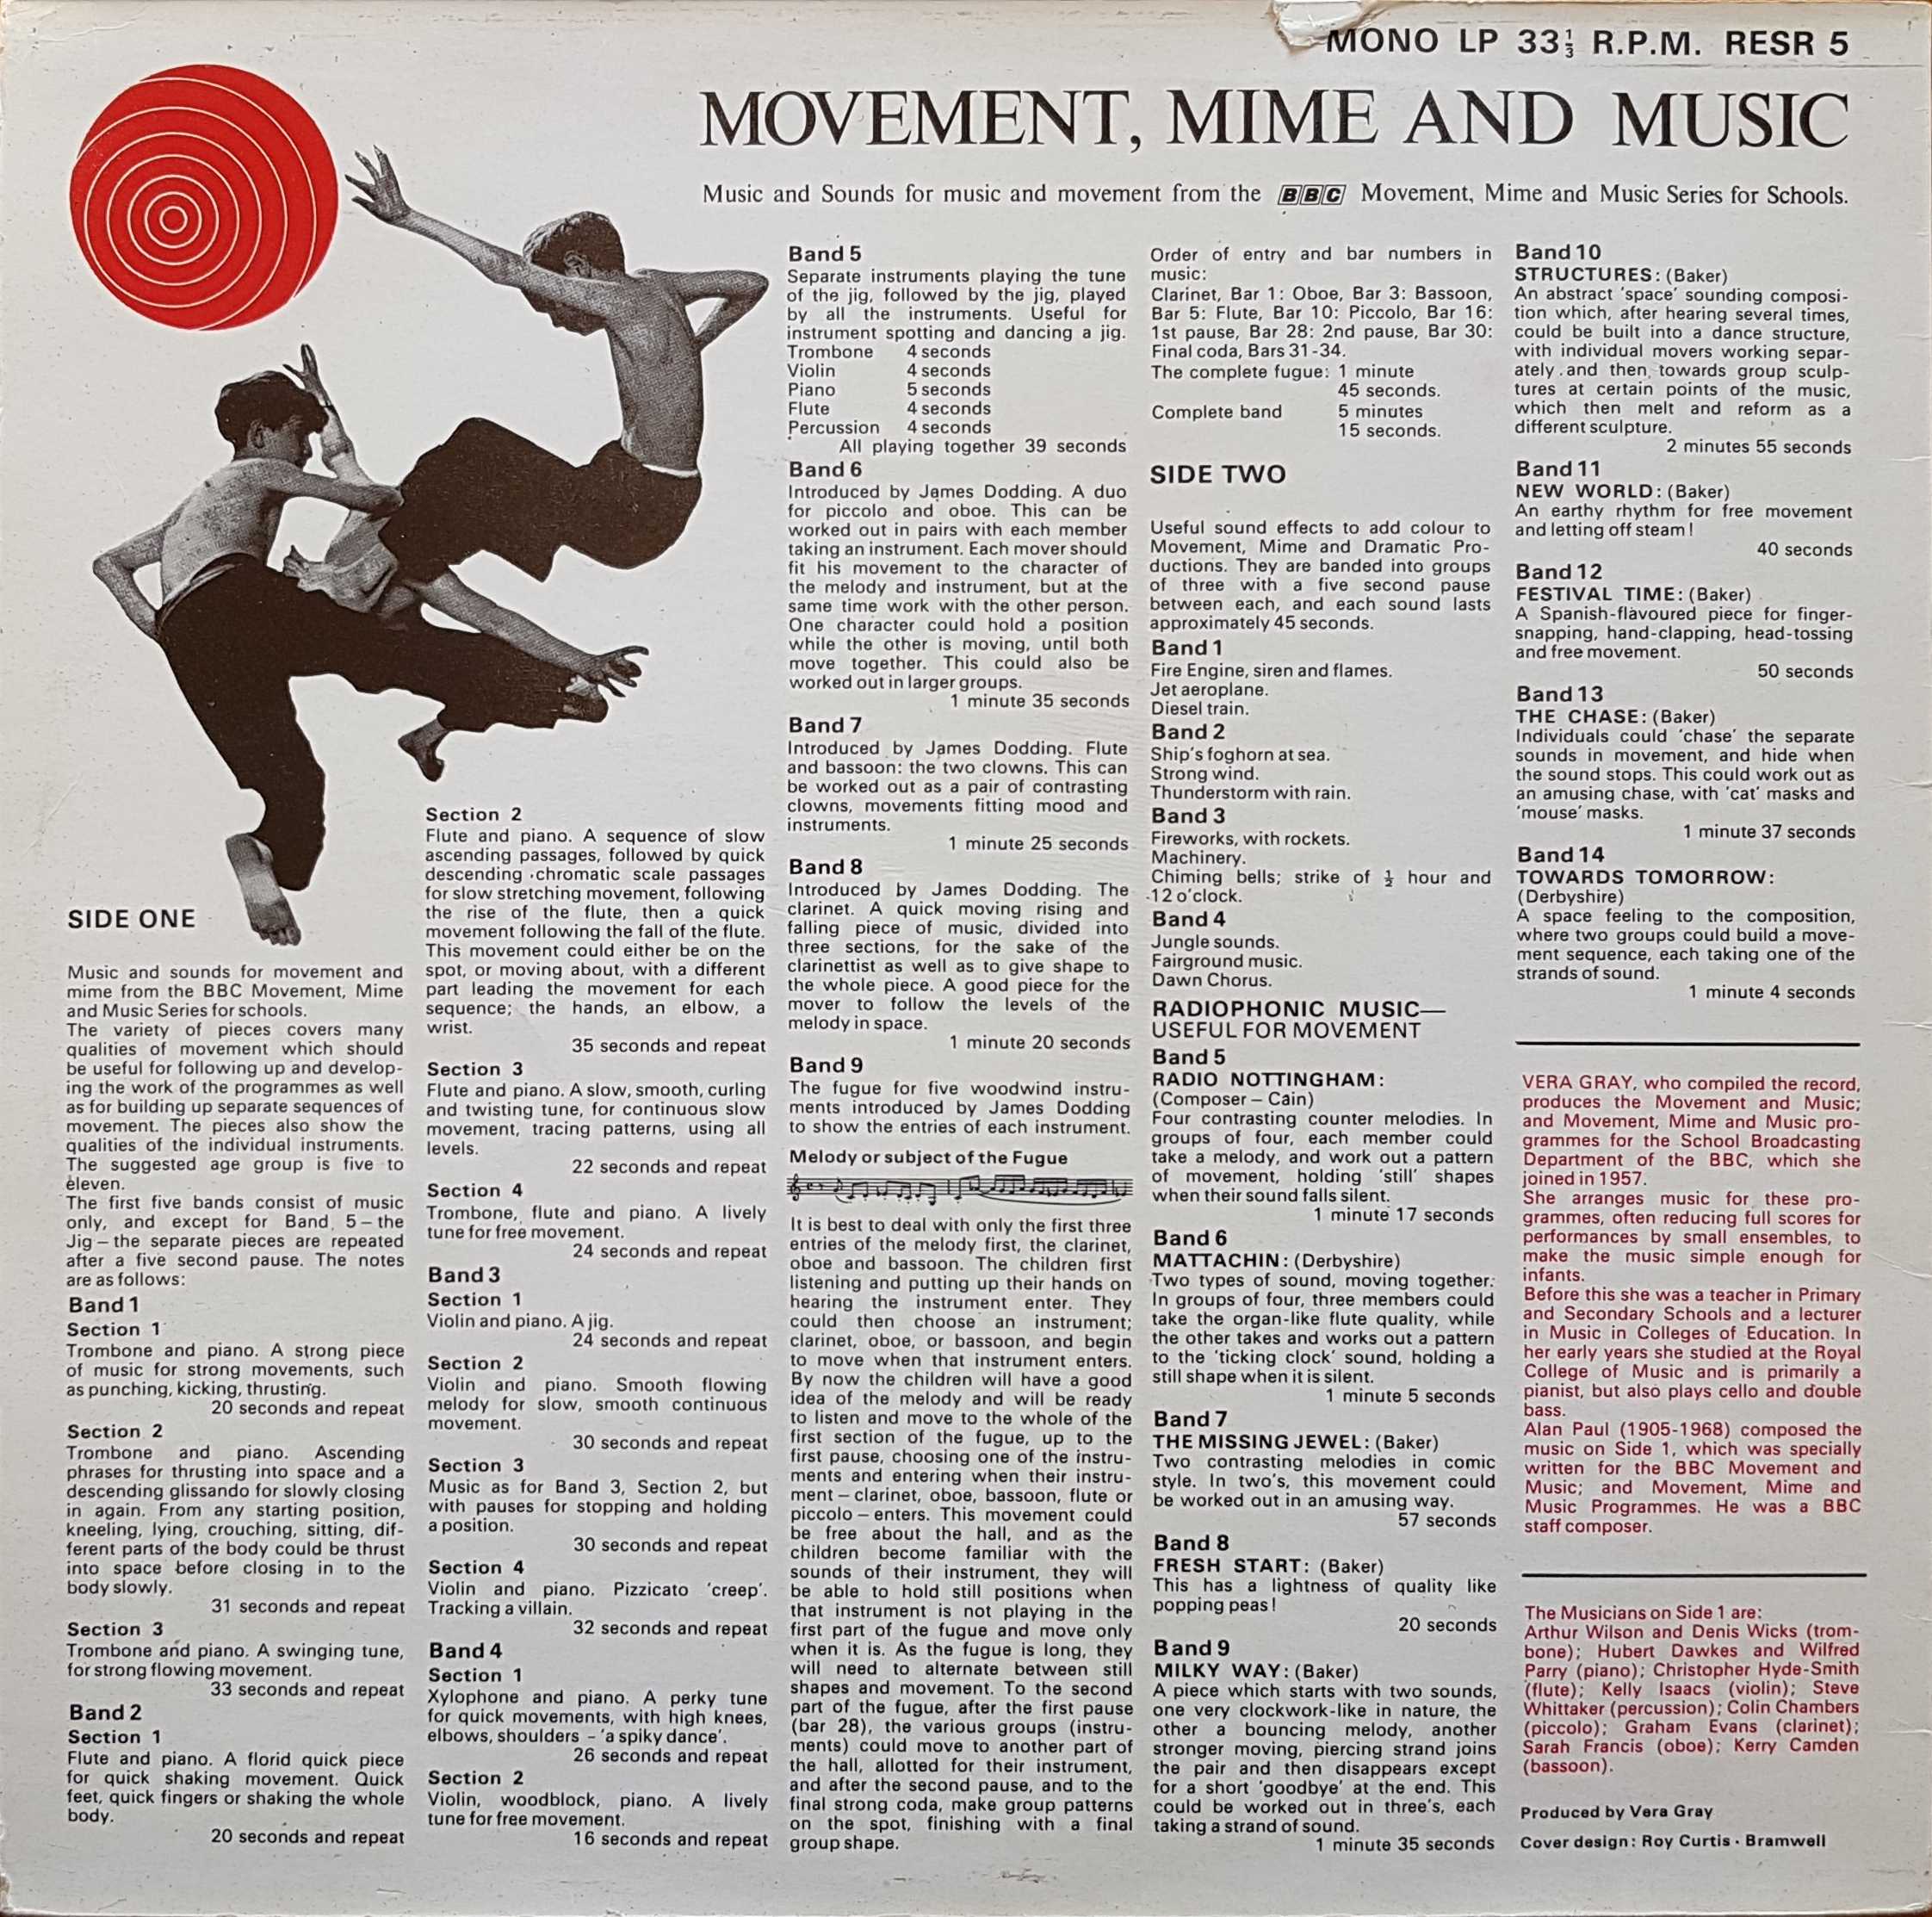 Picture of RESR 5 Movement, mime and music by artist Derbyshire / Baker from the BBC records and Tapes library